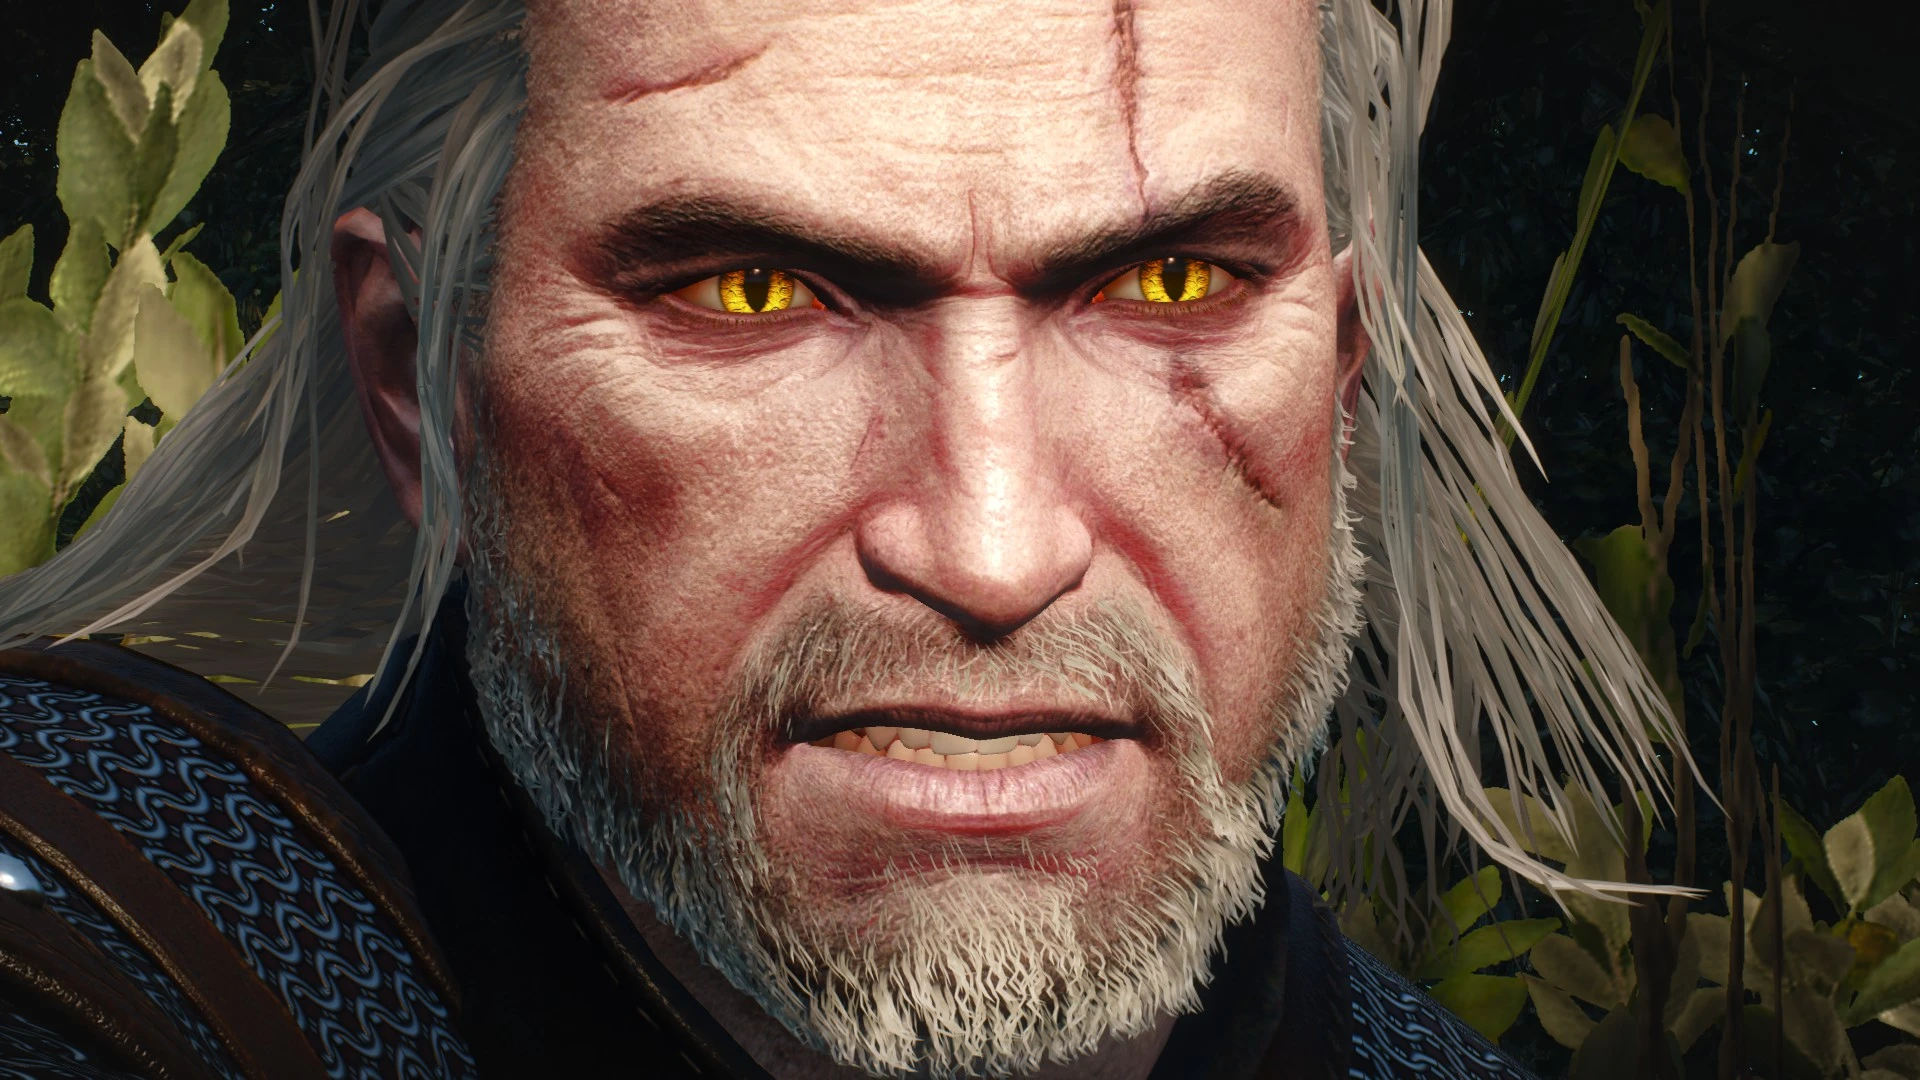 witcher 3 eye for an eye decision